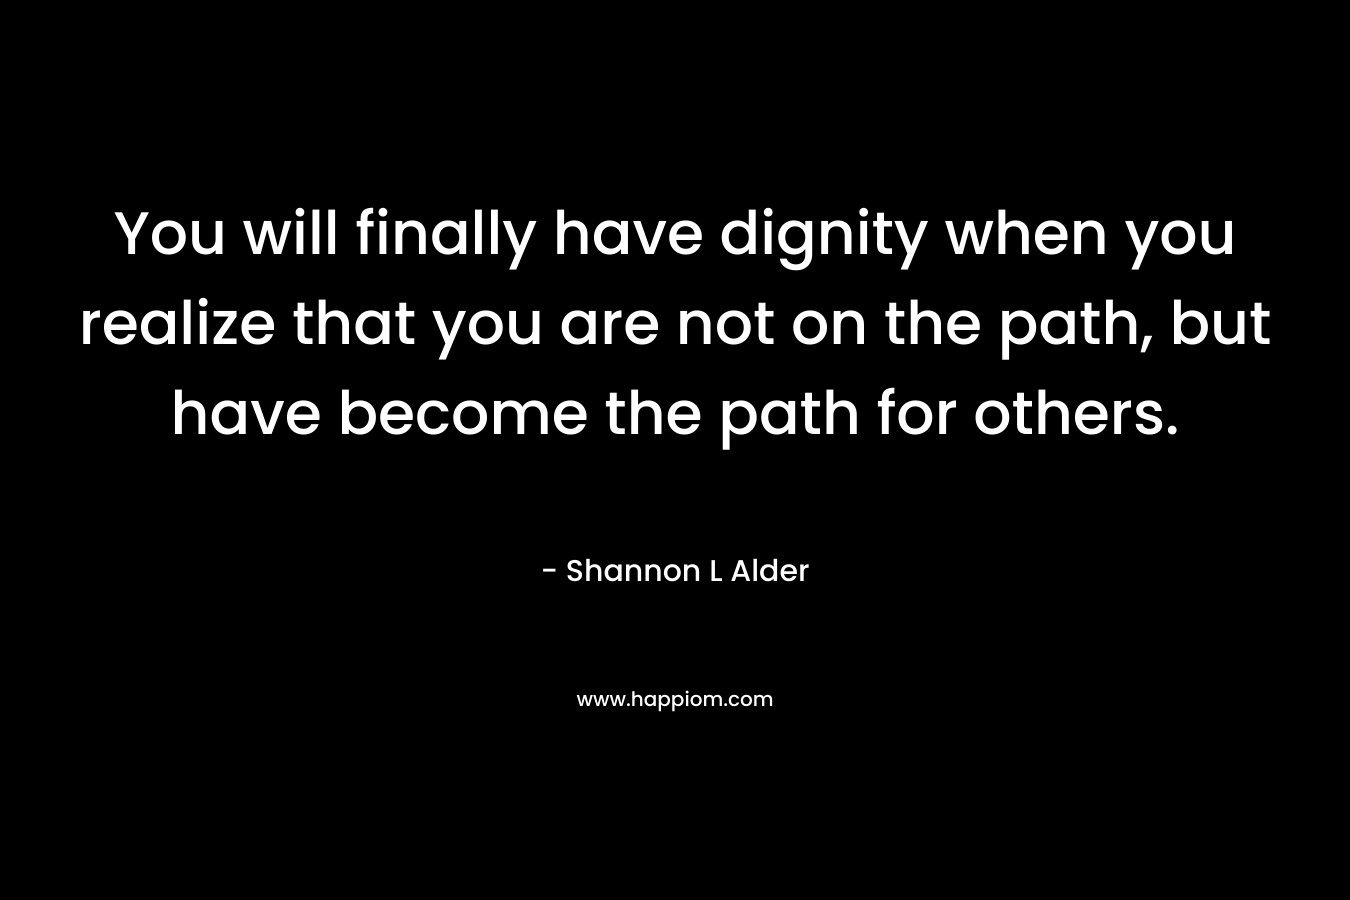 You will finally have dignity when you realize that you are not on the path, but have become the path for others.